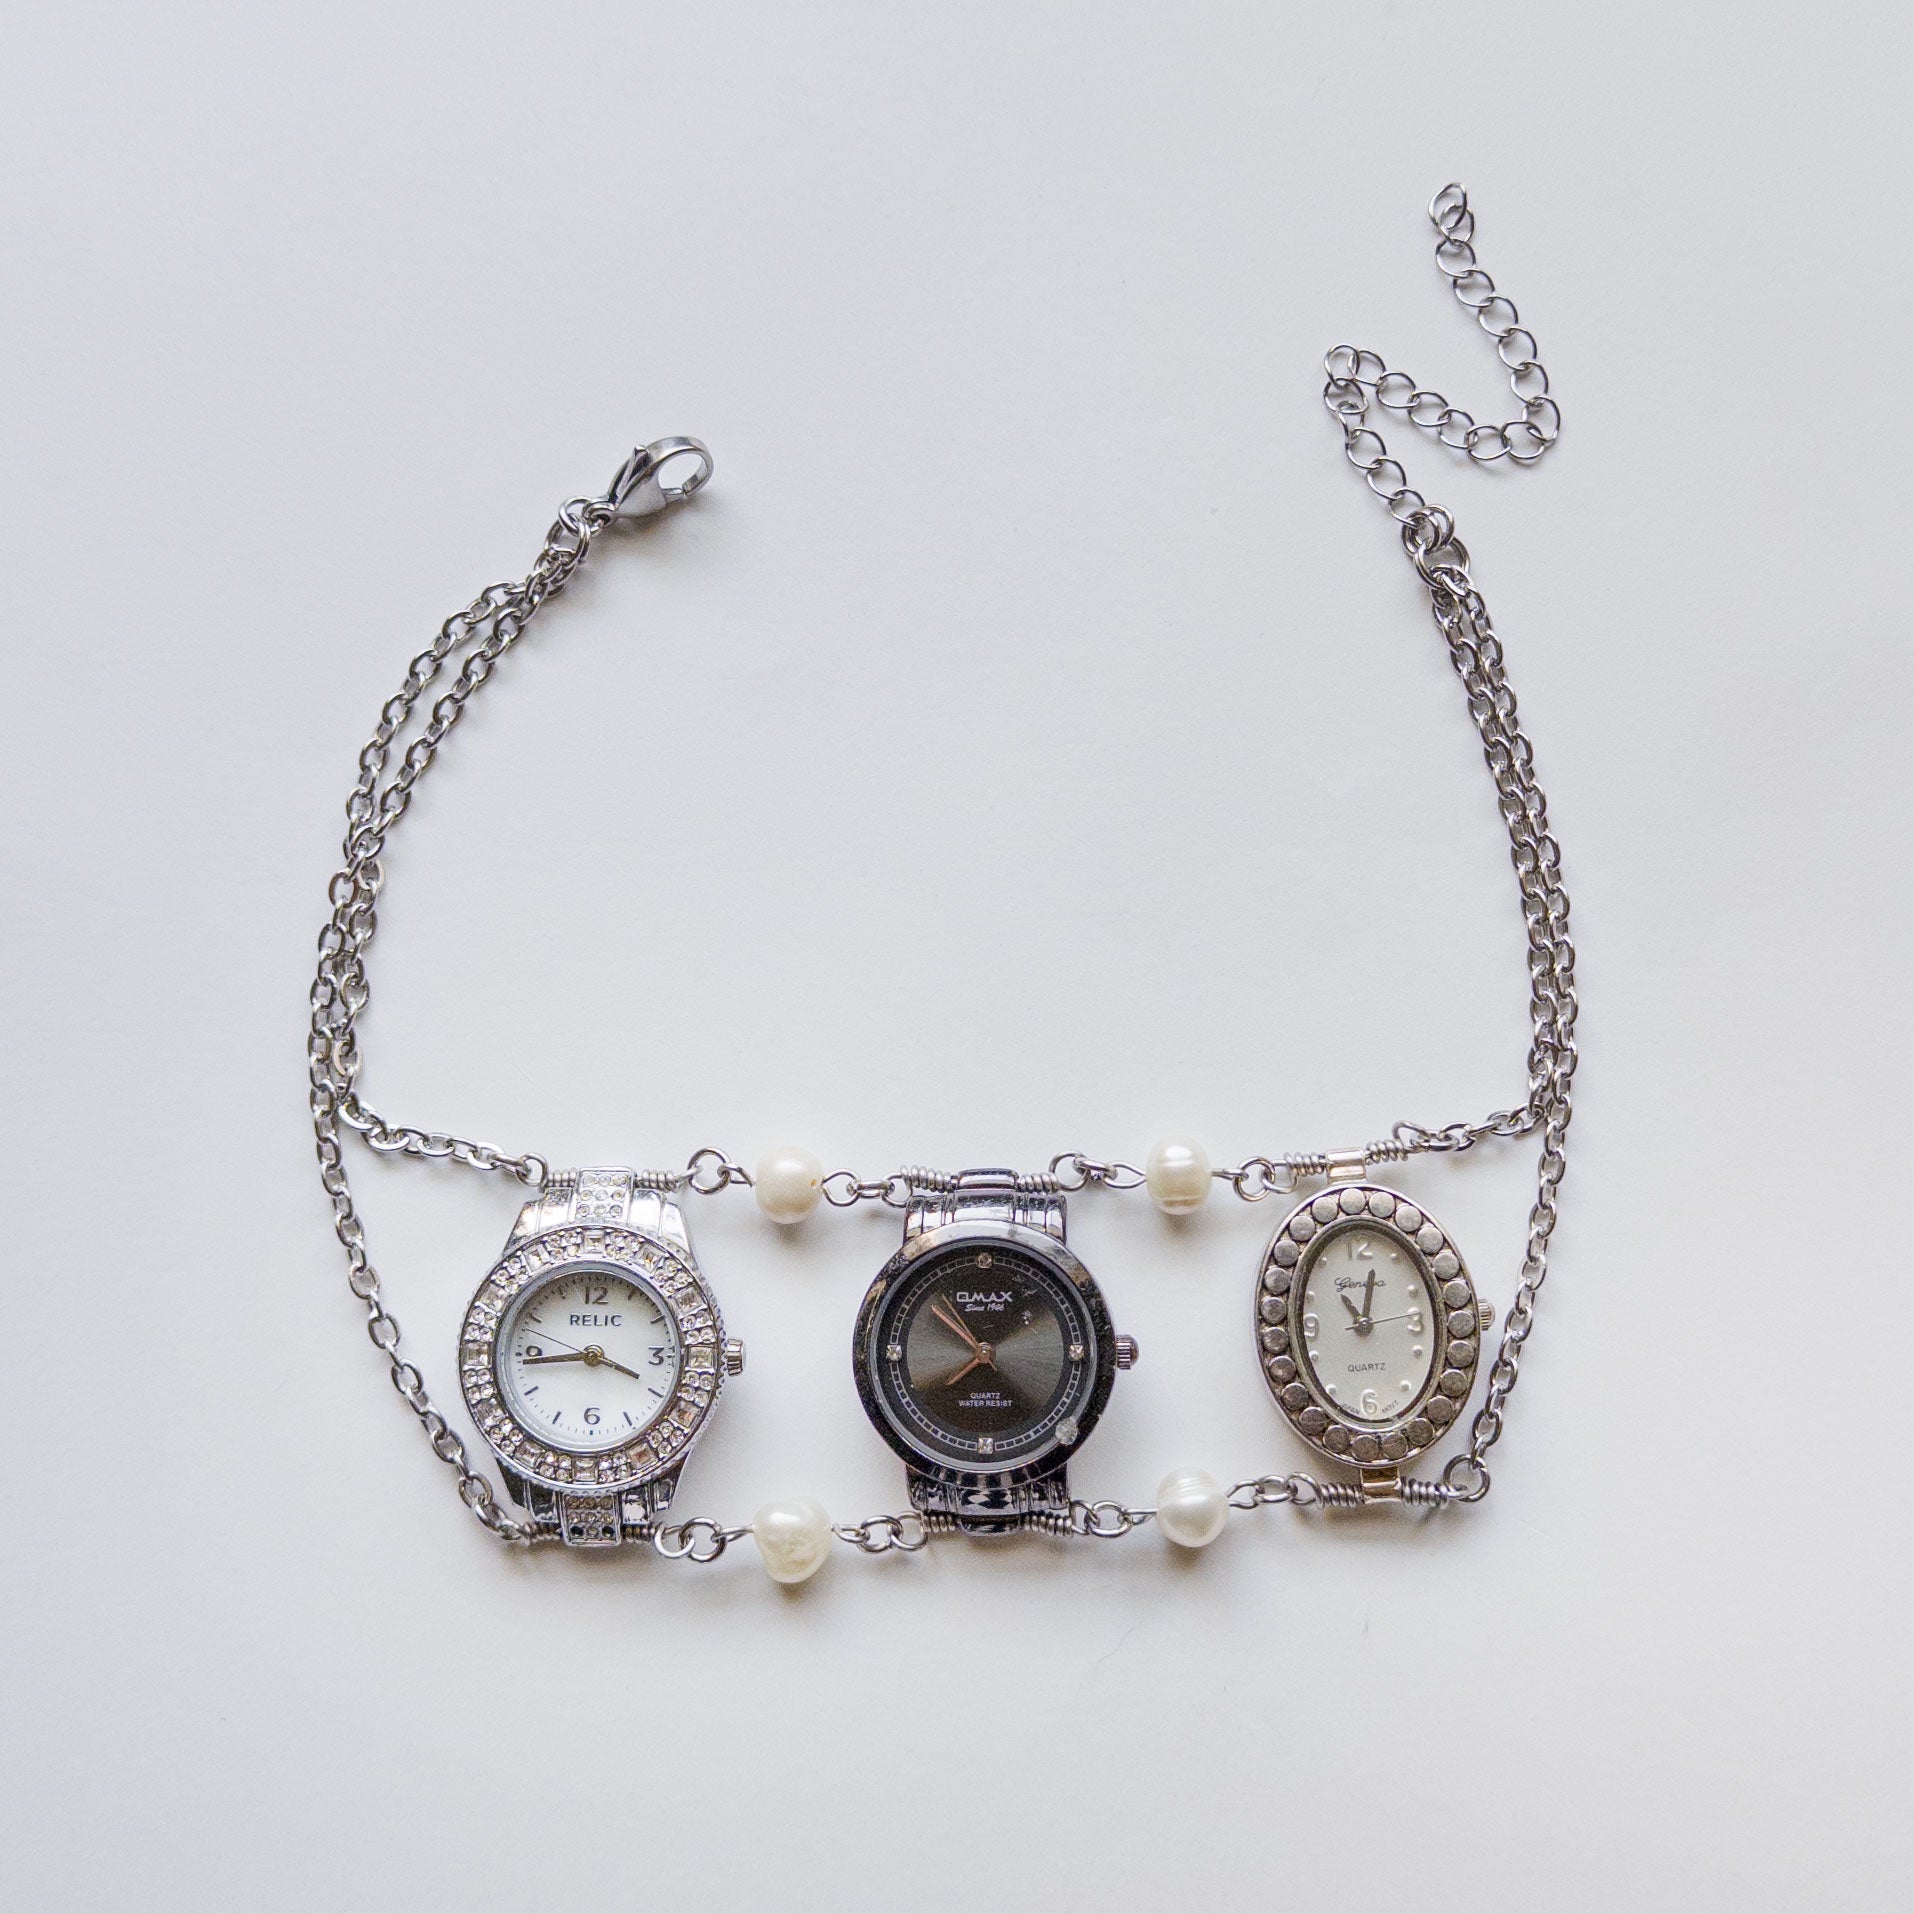 upcycled 3 vintage watch necklace choker stainless steel silver time piece clock classy elegant punk subversive accessories diy avant garde sustainable jewelry fashion futuristic  freshwater pearls dangly